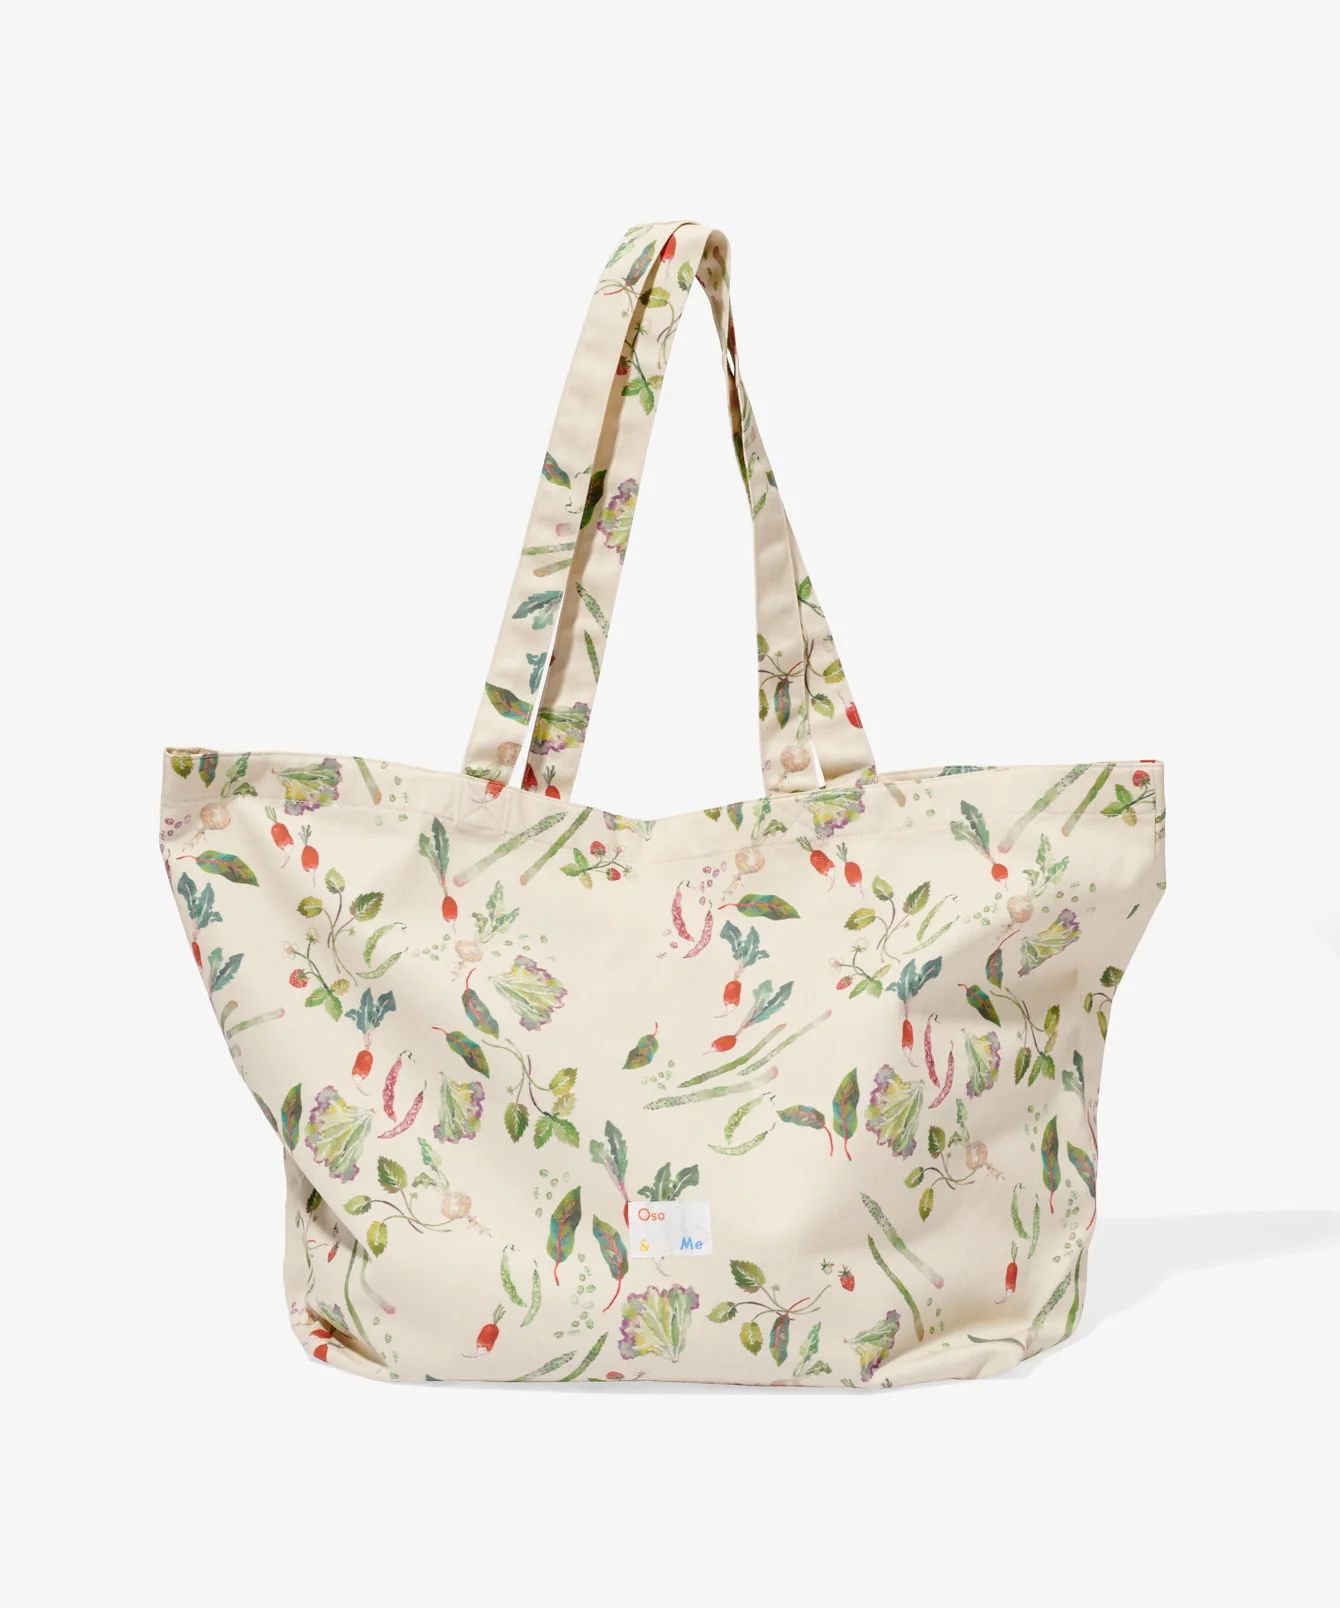 Tote Bag in Eat Your Greens | Oso & Me | Oso & Me